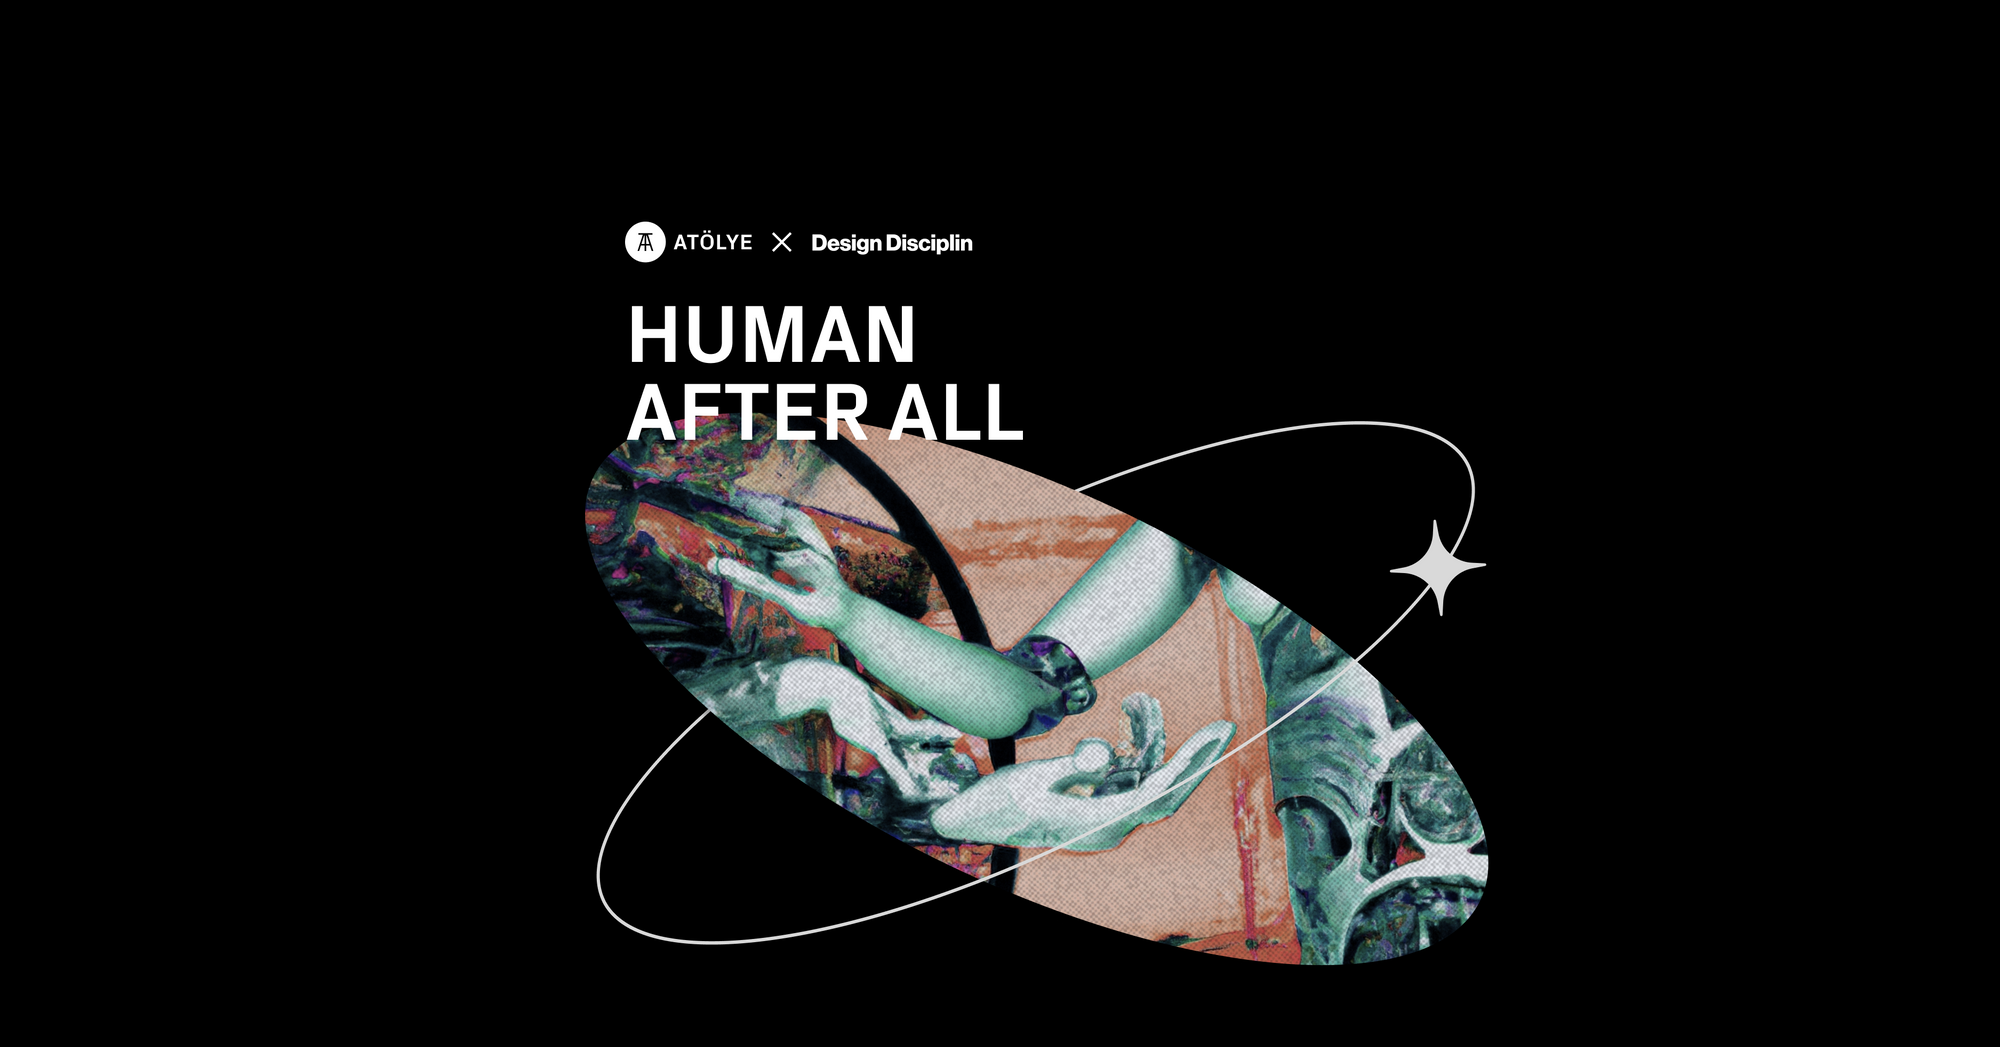 Human After All at ATÖLYE with Guest Speaker Timmy Ghiurau